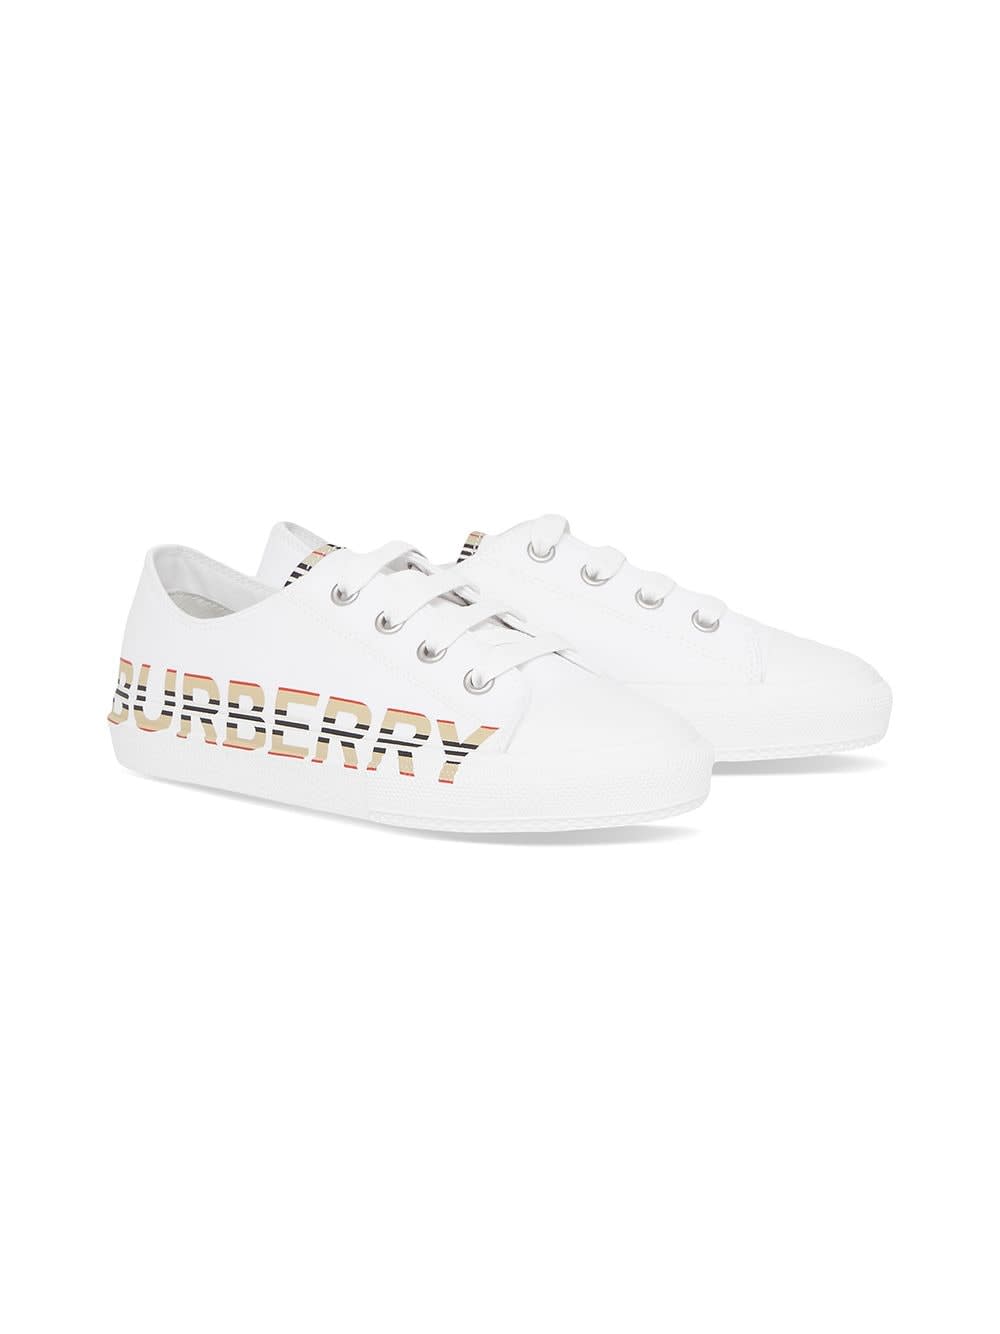 Burberry Larkhall Sneakers In Fabric With Logo Print